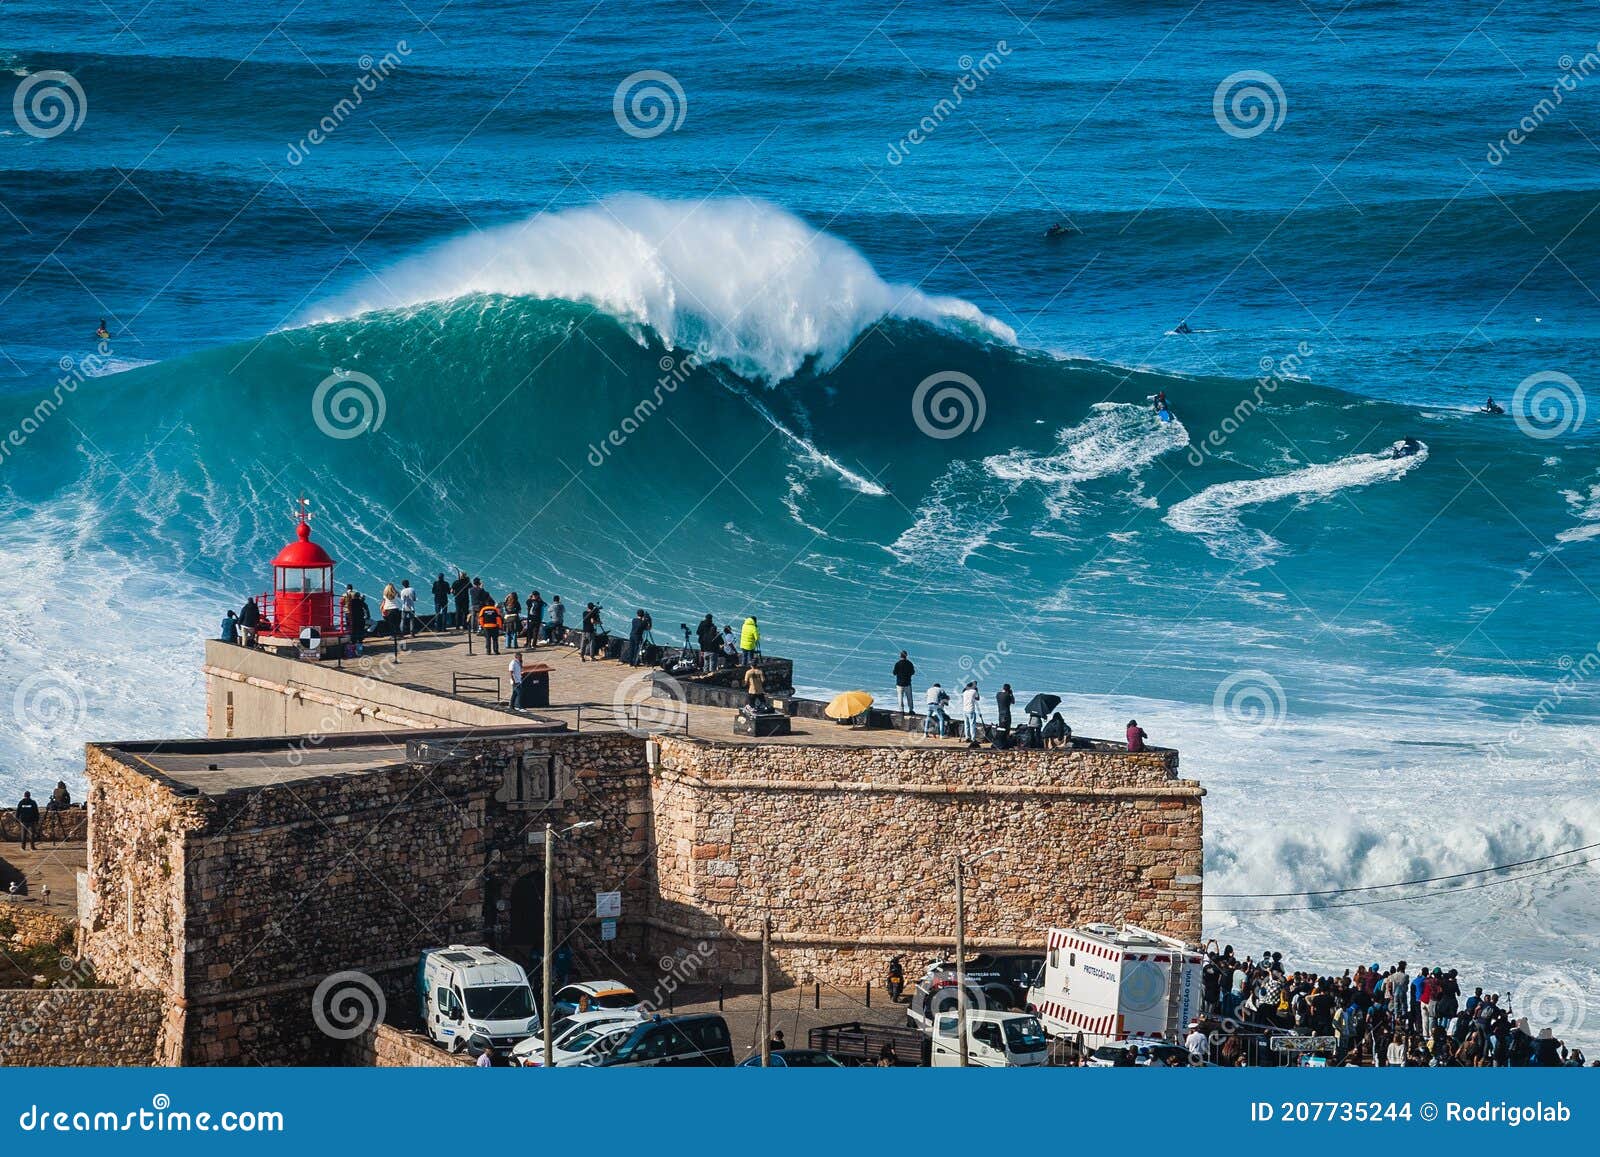 nazare, portugal, surfer riding giant wave in front of nazare lighthouse